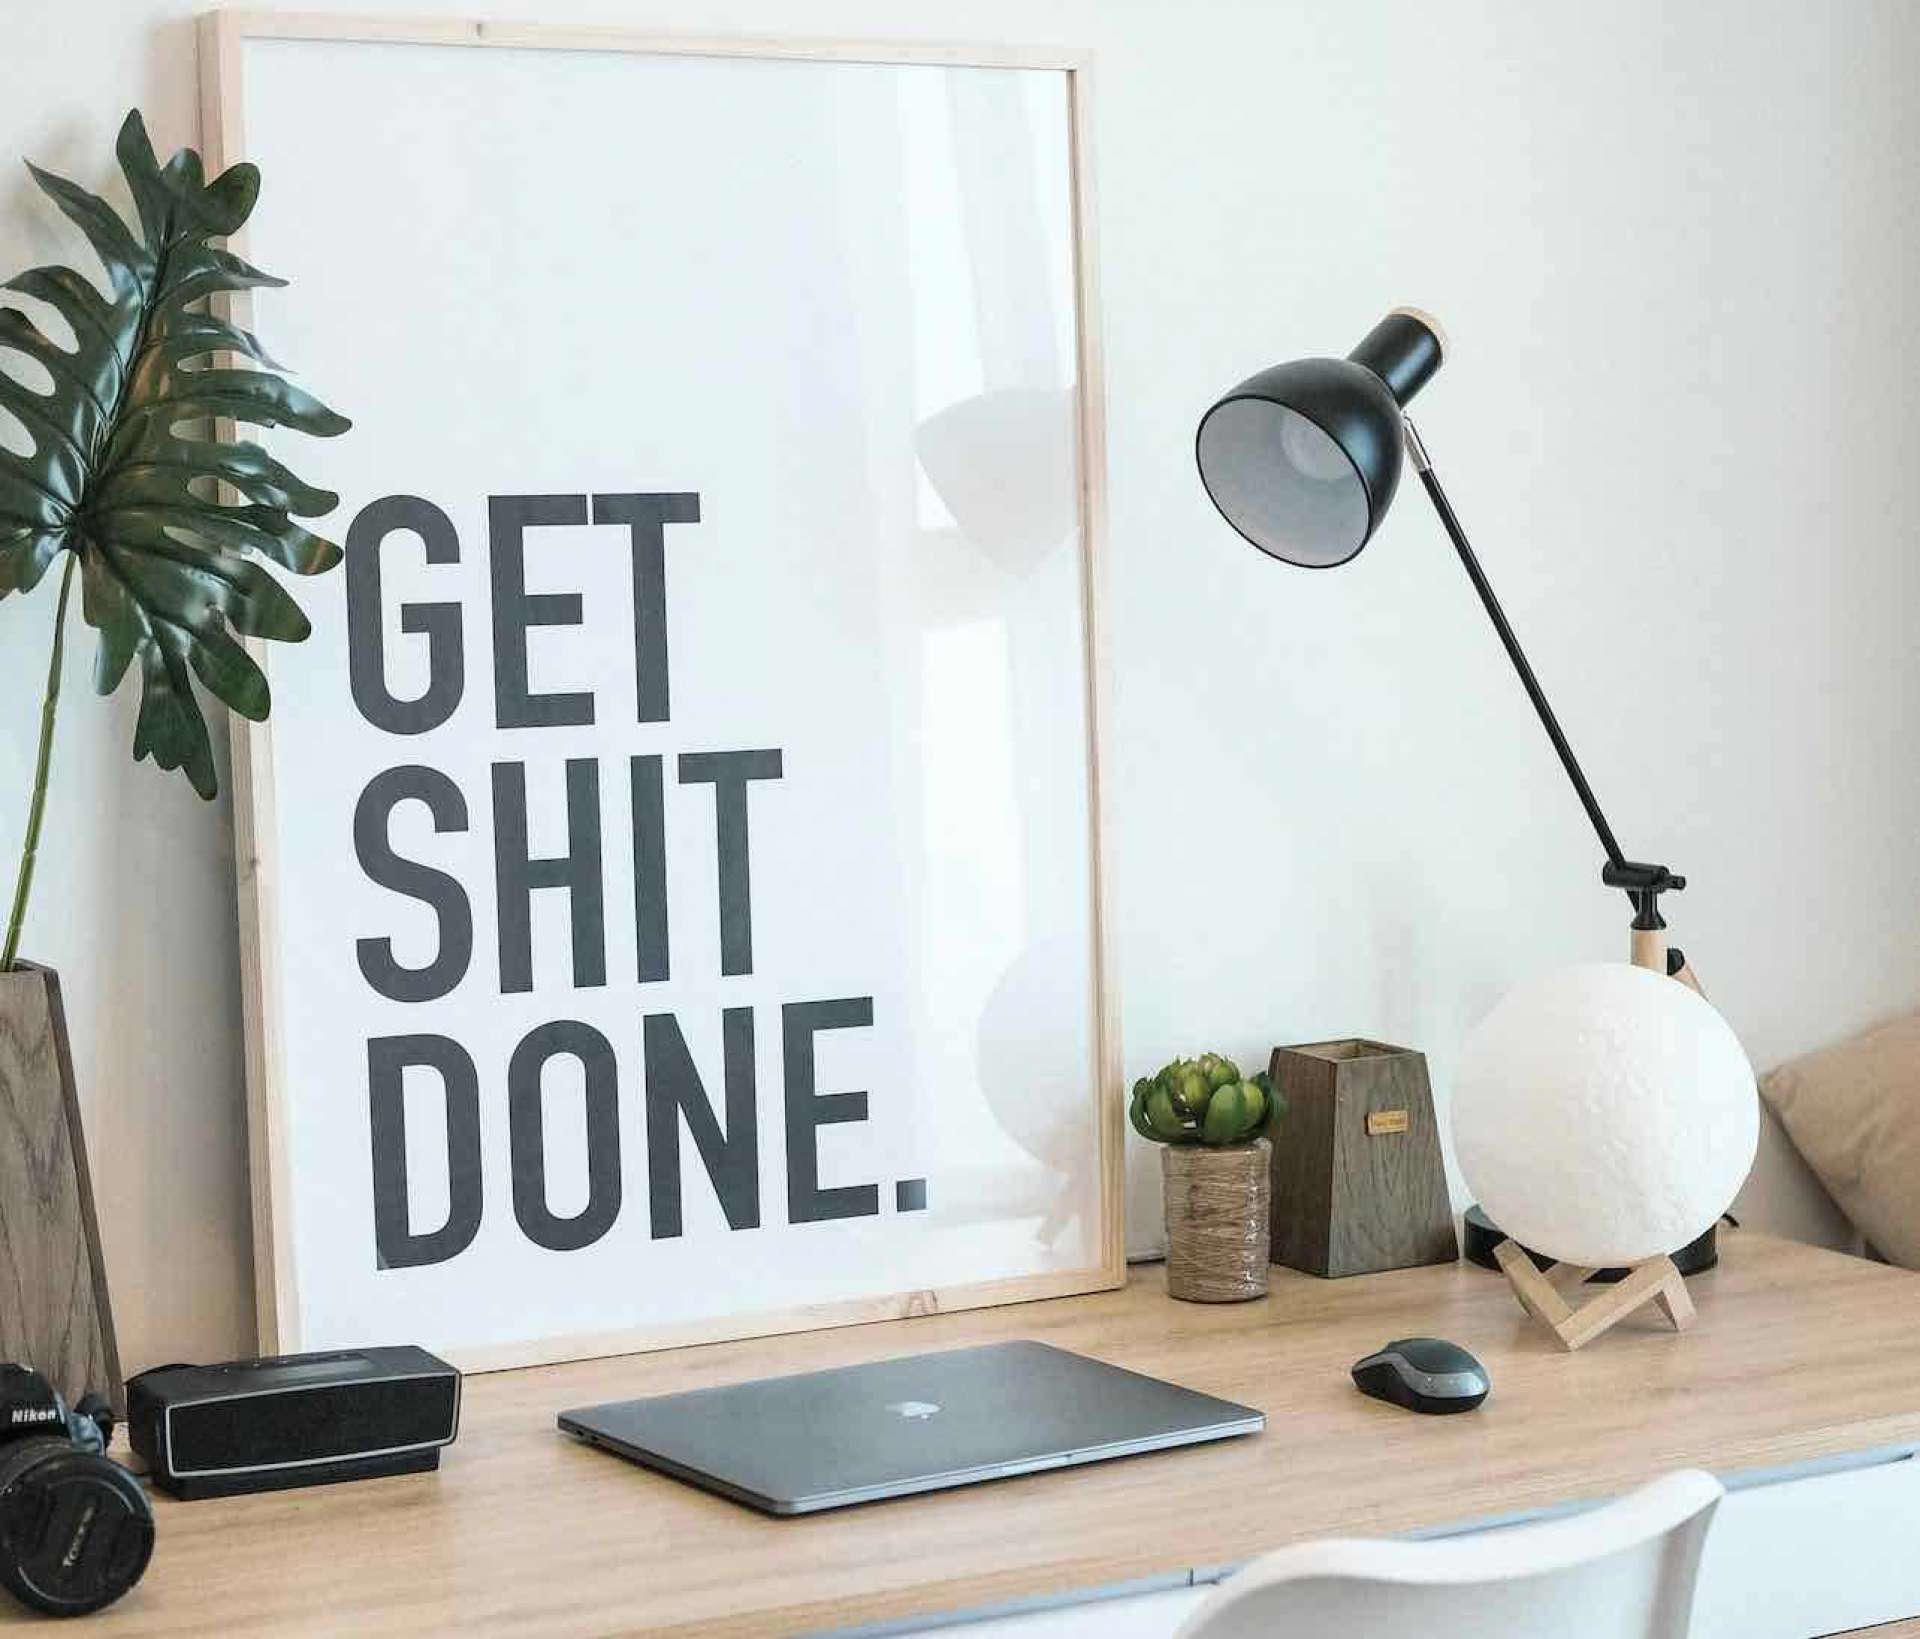 Increase Productivity - Get Shit Done